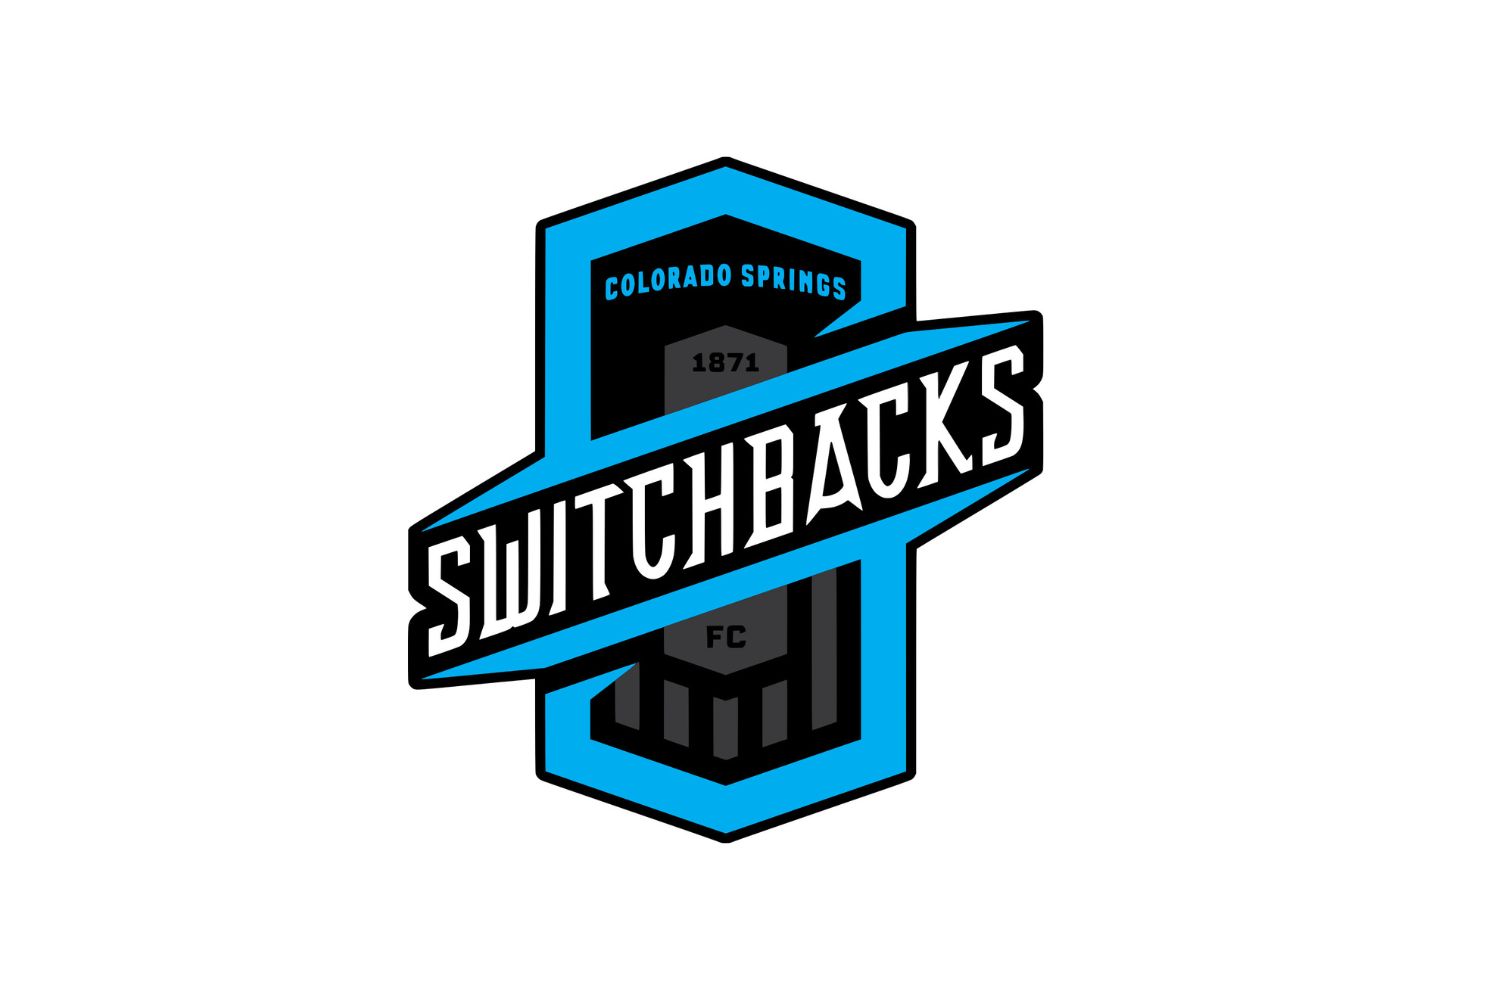 Colorado Springs Switchbacks FC: 20 Football Club Facts - Facts.net